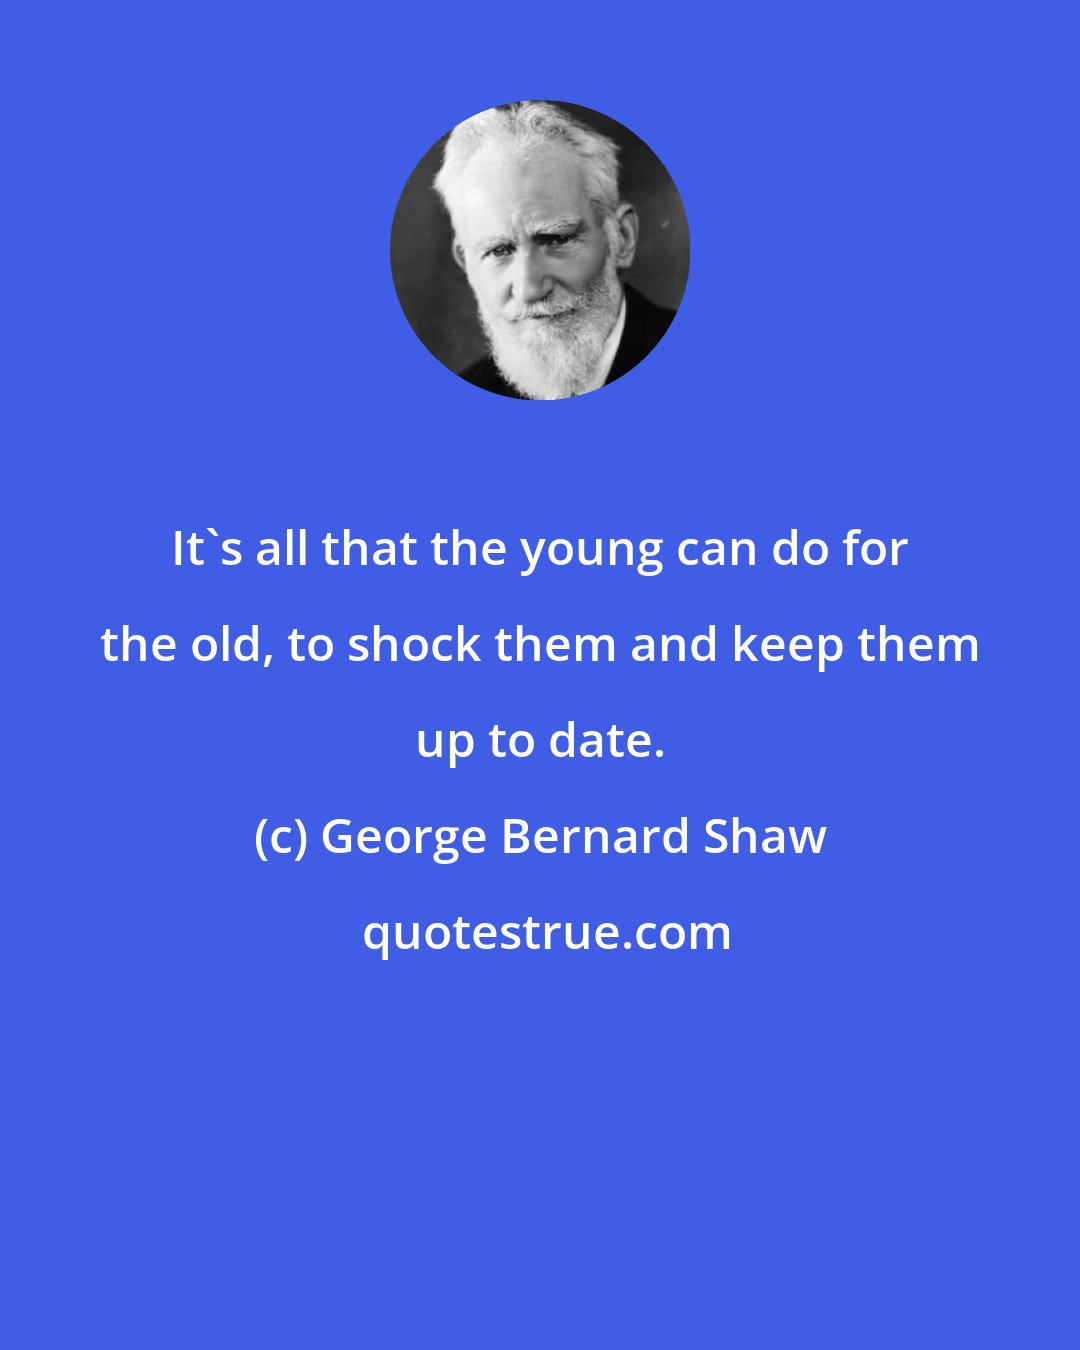 George Bernard Shaw: It's all that the young can do for the old, to shock them and keep them up to date.